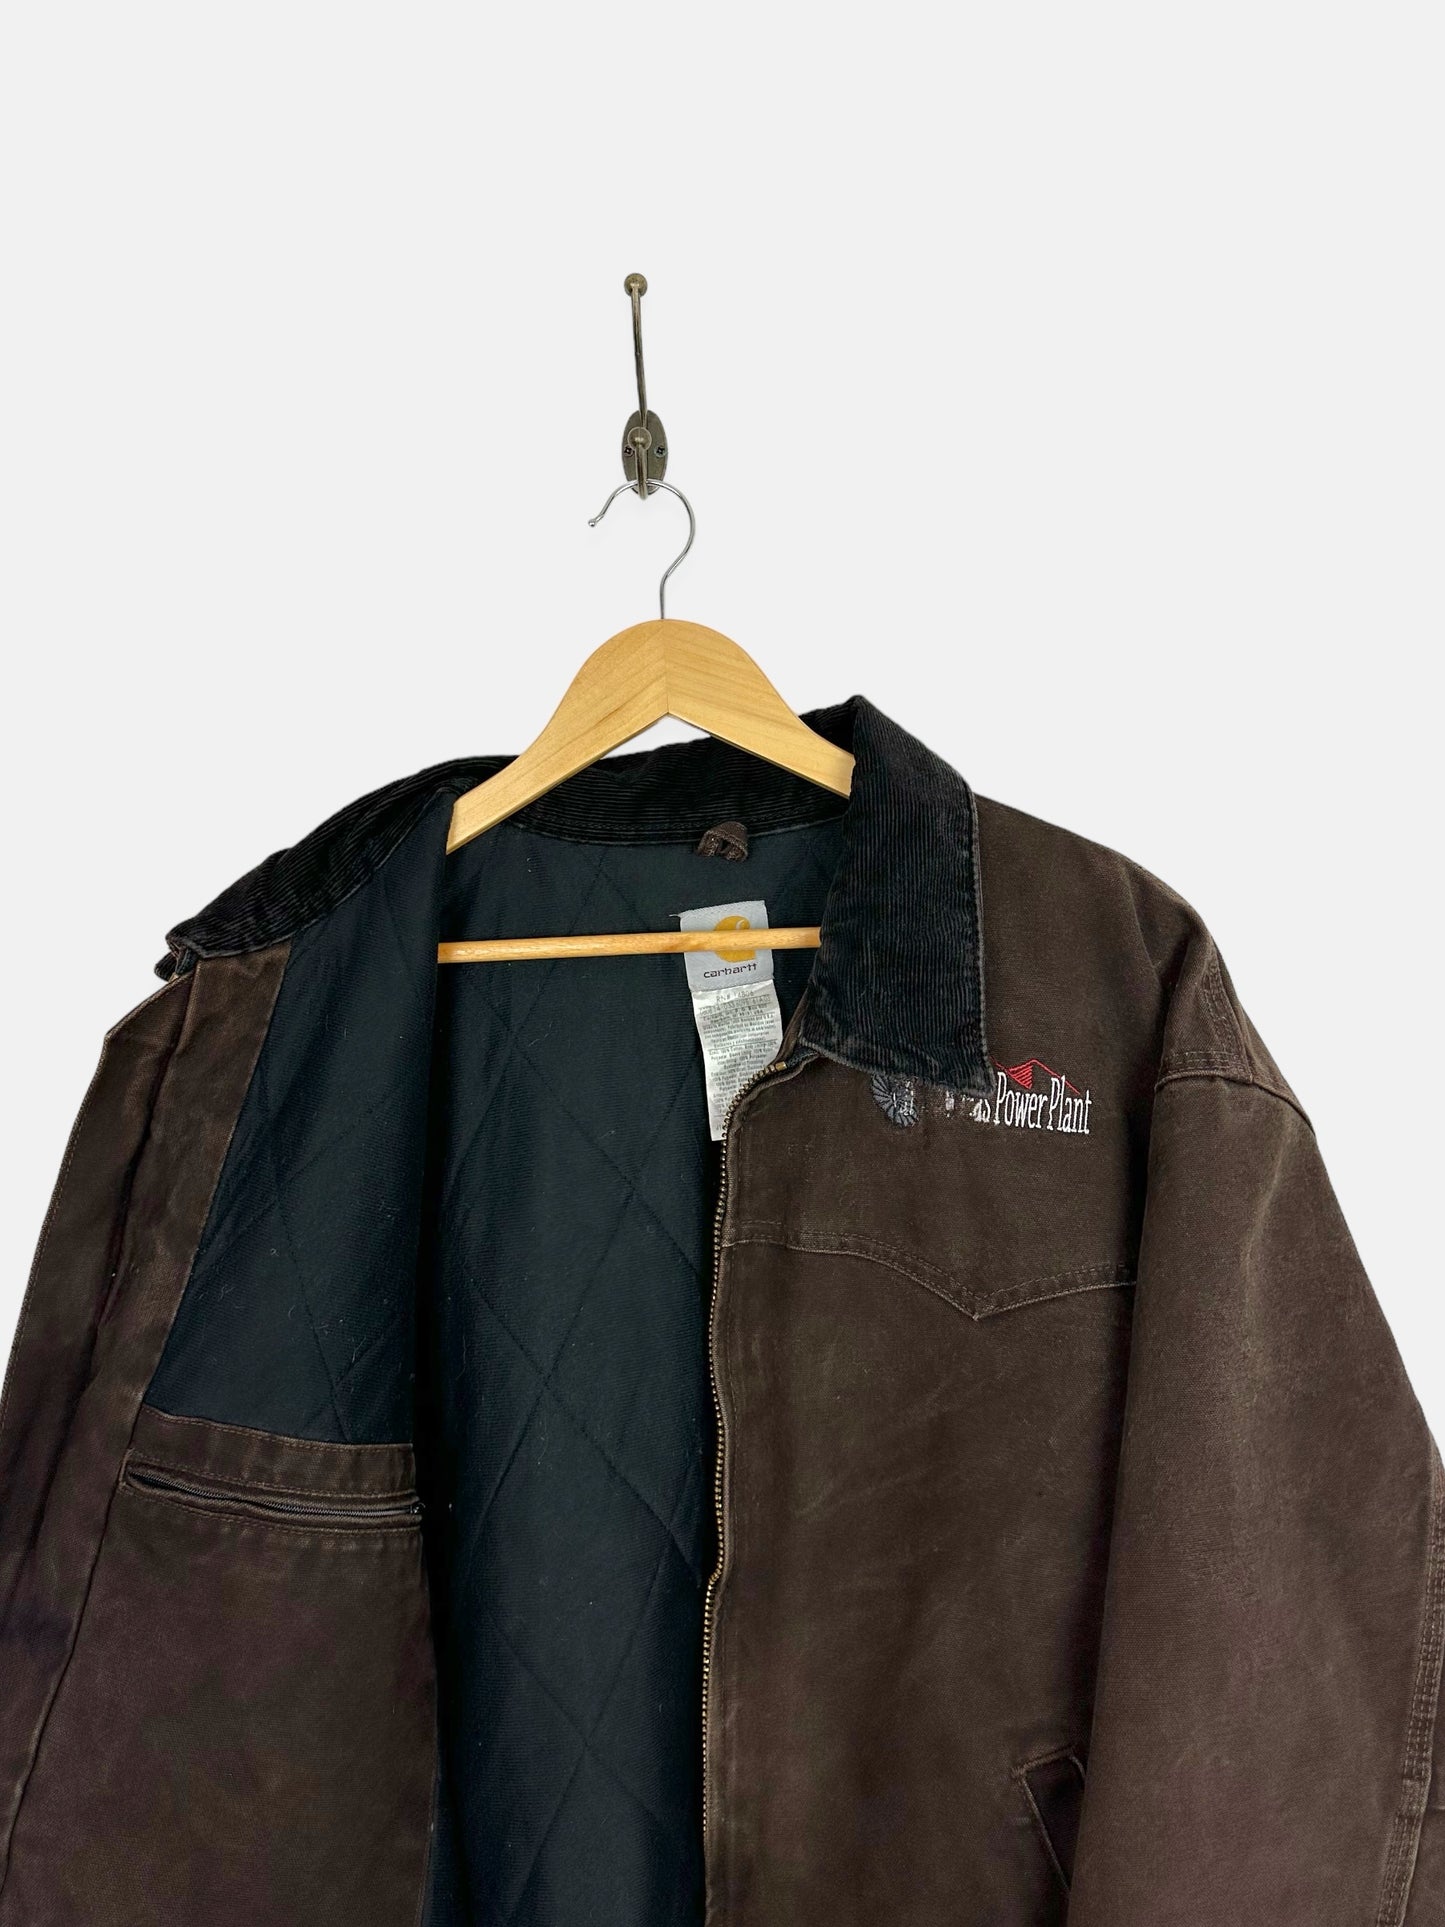 90's Carhartt Heavy Duty Vintage Quilt Lined Jacket Size 2XL